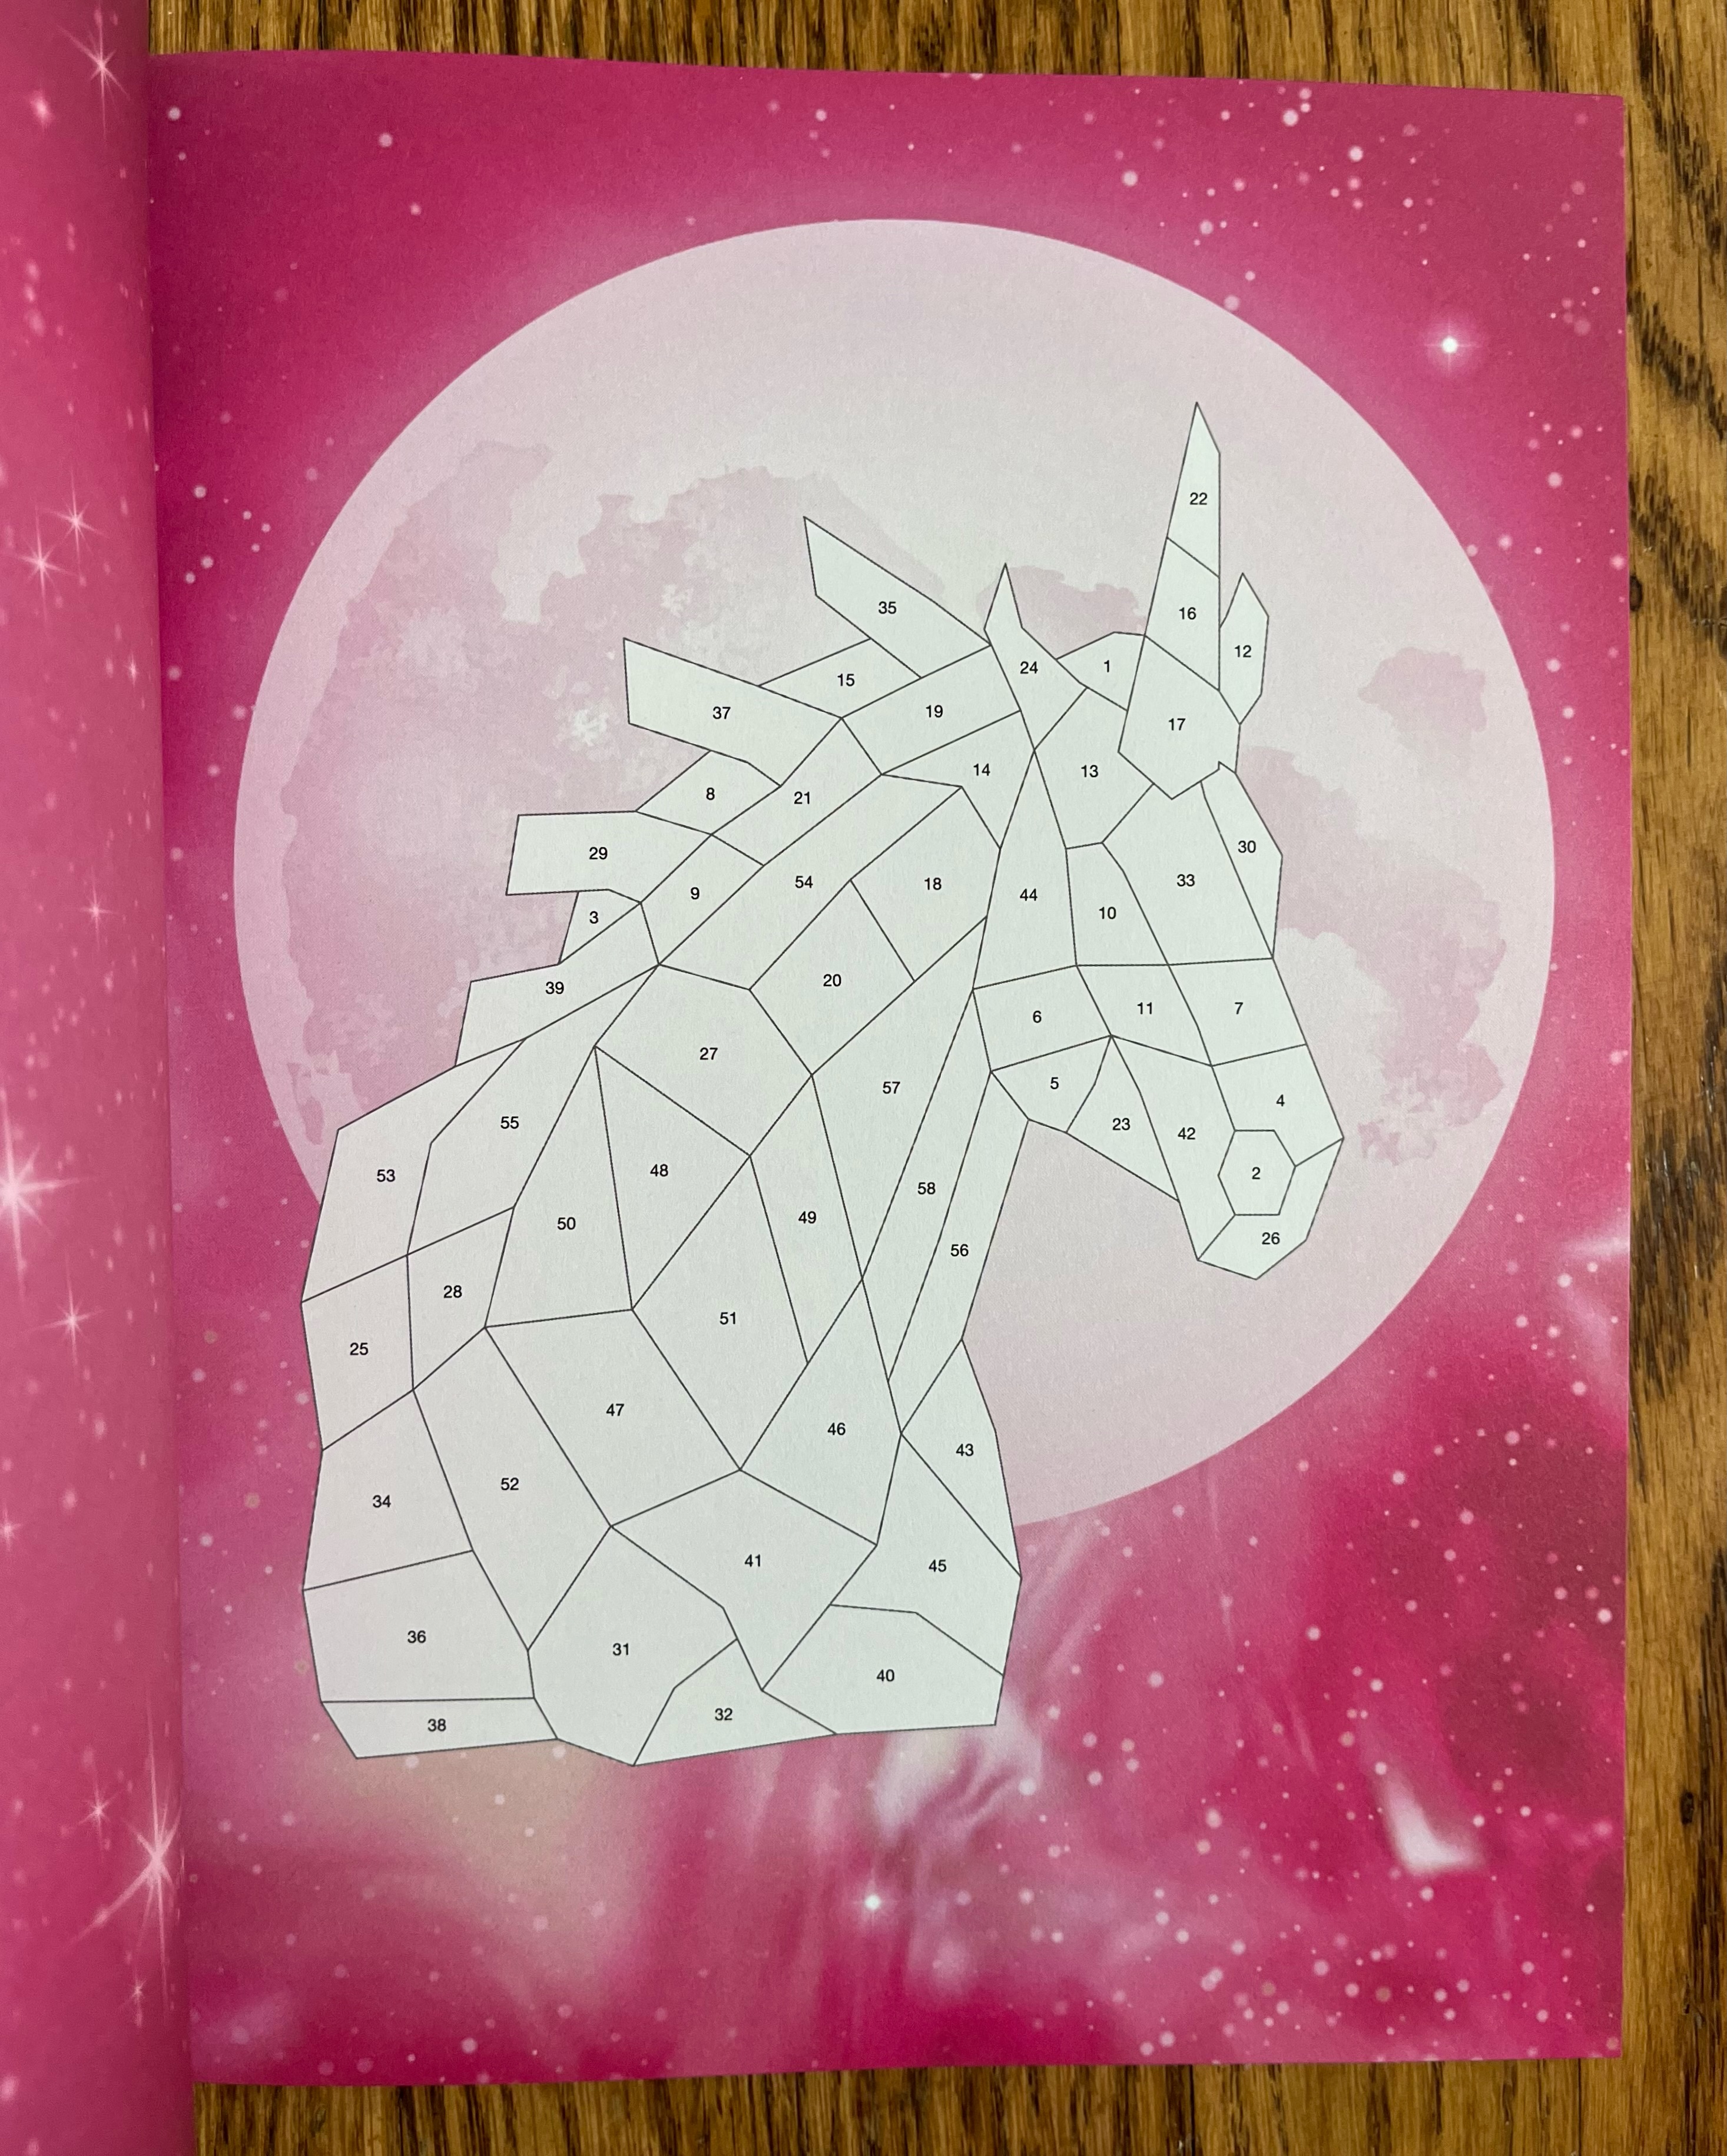 Sparkly Unicorn Sticker Mosaic page empty with numbered spaces